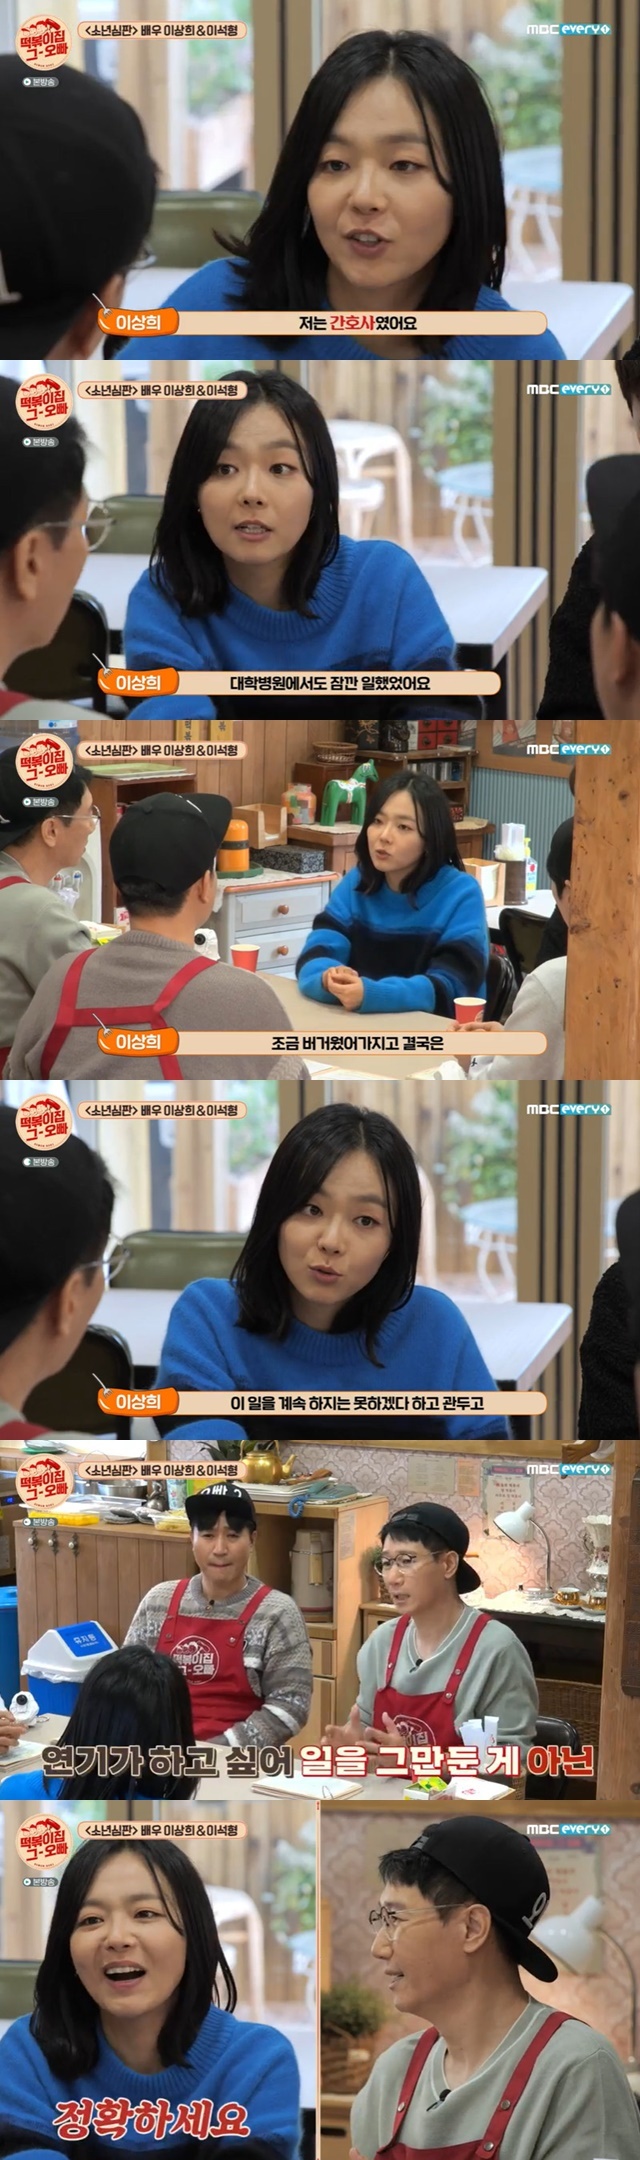 Lee Sang-hee quit nurse and confessed to becoming an actorMBC Everlons Teokbokki house brother, which was broadcast on March 29, featured Boy Judge actors Lee Sang-hee and Lee Seok-hyung.I was a nurse before, and I worked at a university hospital for a while, and I was a little bit too busy to do this, so I quit and started acting, Lee Sang-hee said on the show.Ji Suk-jin was surprised that he did not quit the nurse because he wanted to play, but because he was in trouble. Lee Sang-hee said, It is accurate. I was interested in acting, but I did not quit to act.When Kim Jong-min asked, How did you act? Lee Sang-hee said, My close friend was a film department at Sangmyung University.I was vaguely interested in making movies. 